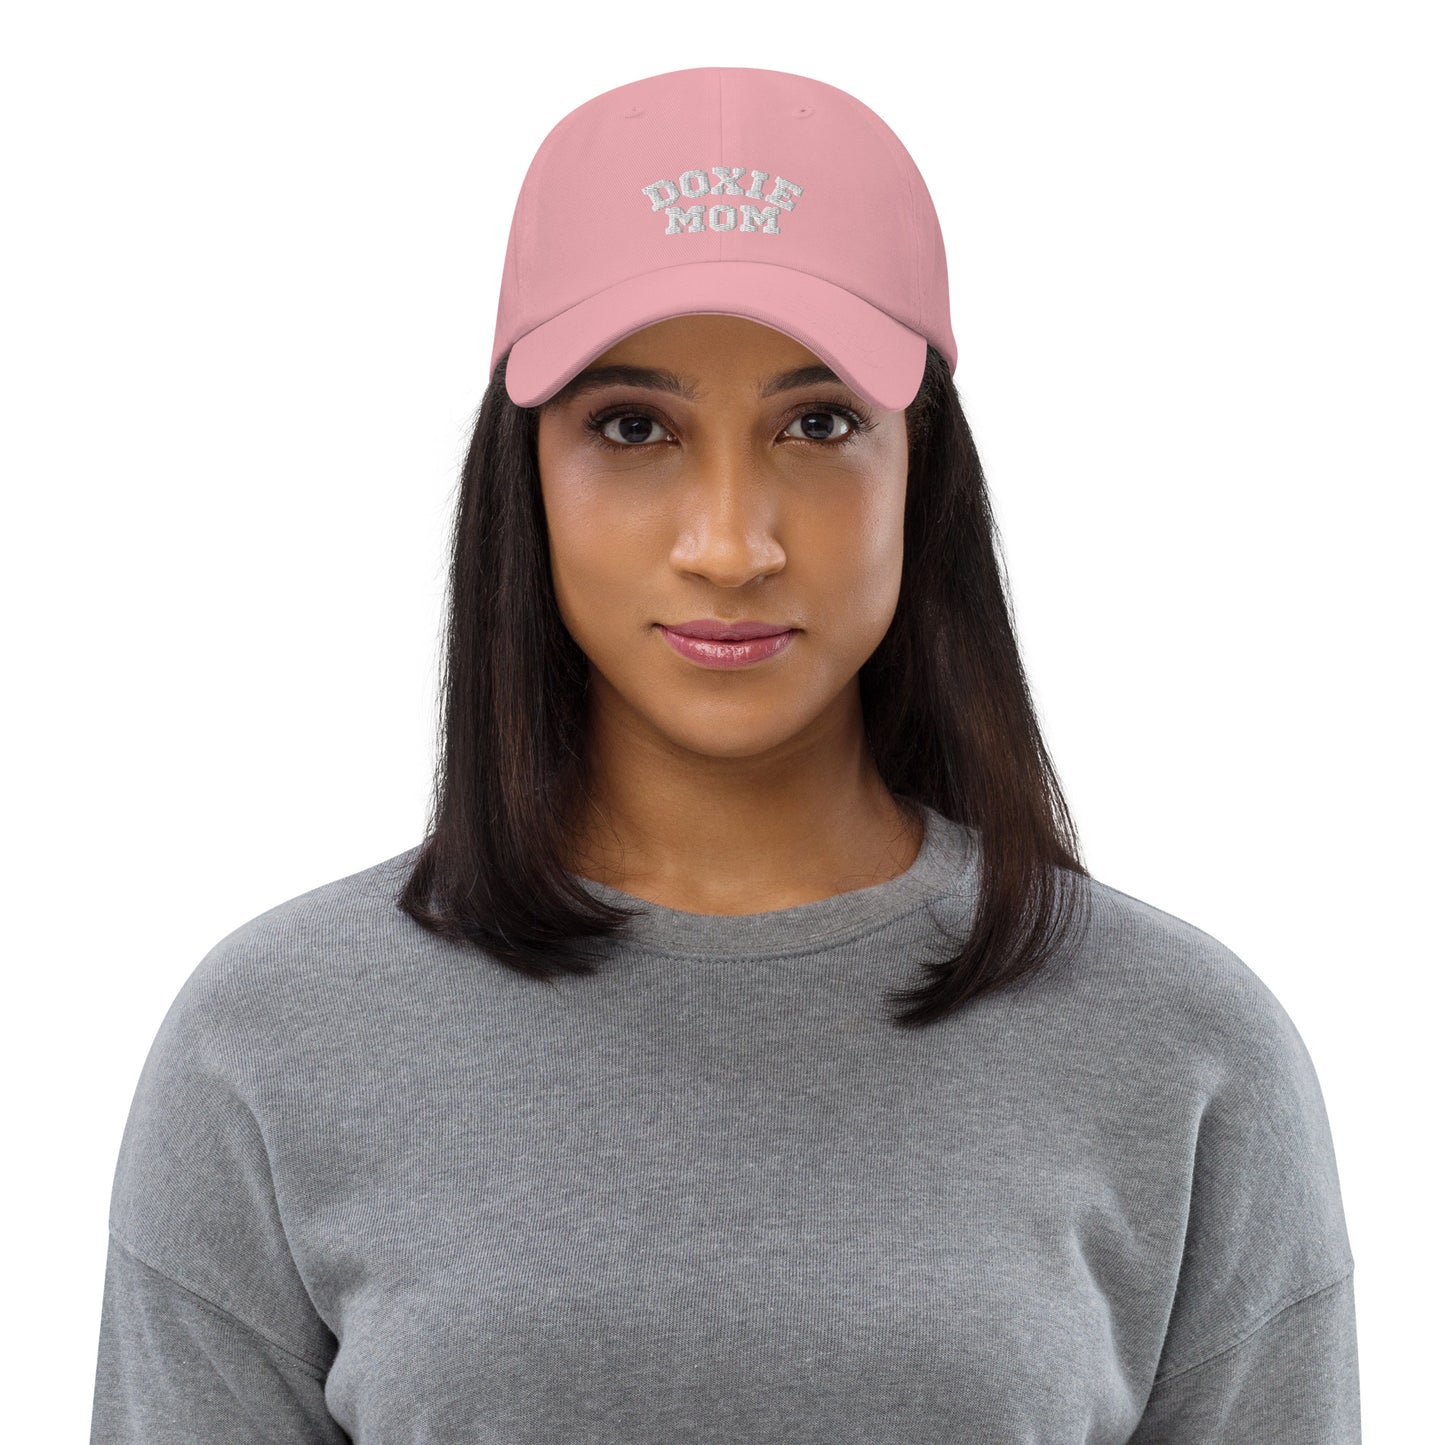 Doxie Mom Hat